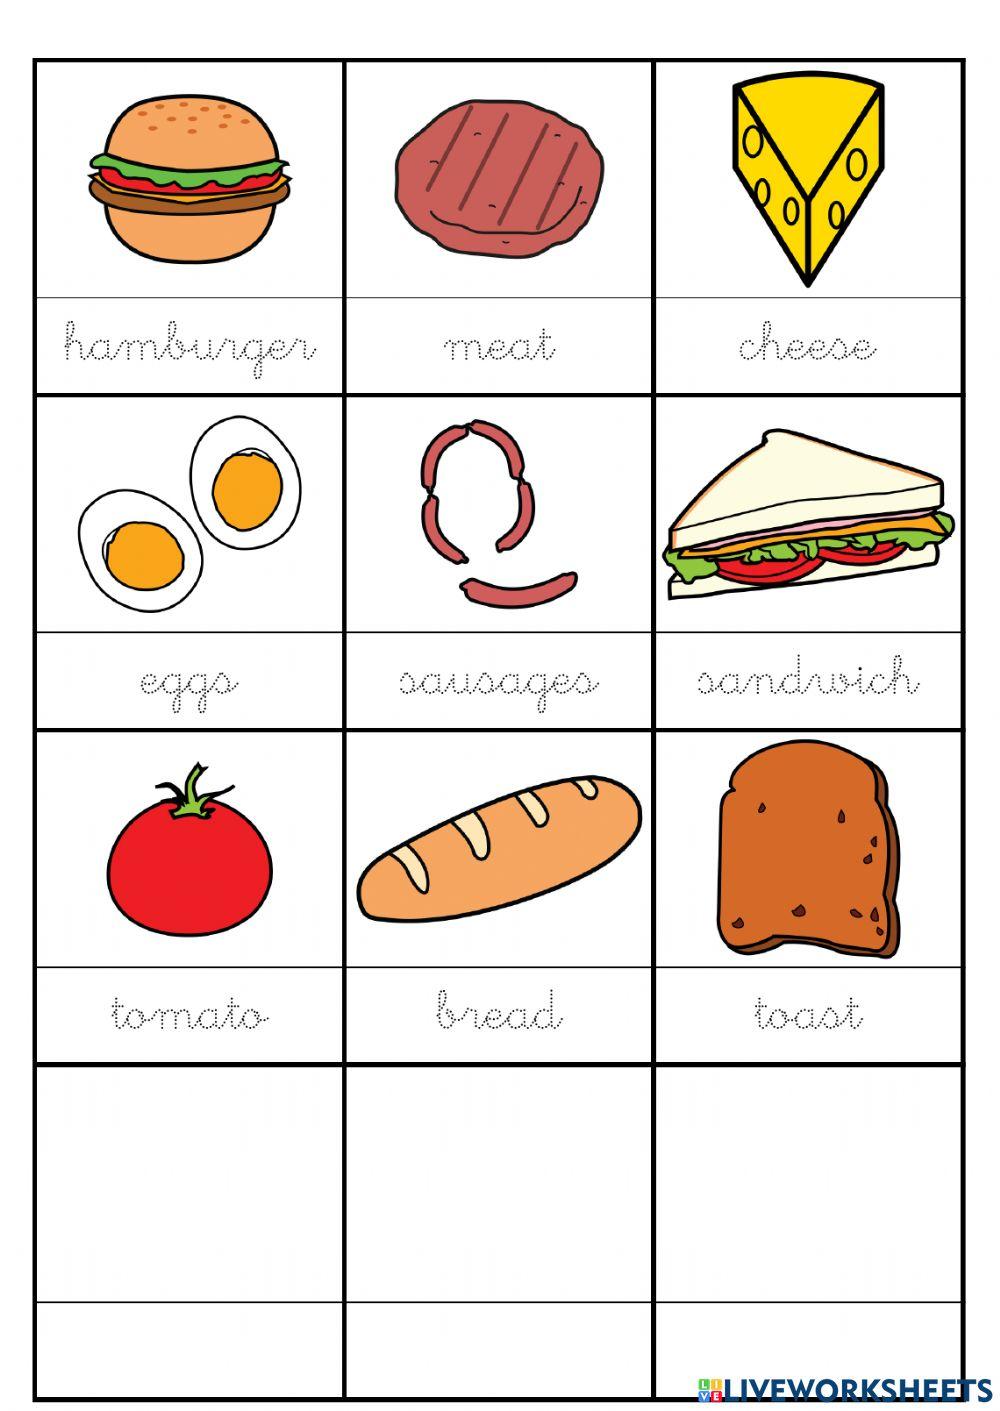 Vocabulary about food